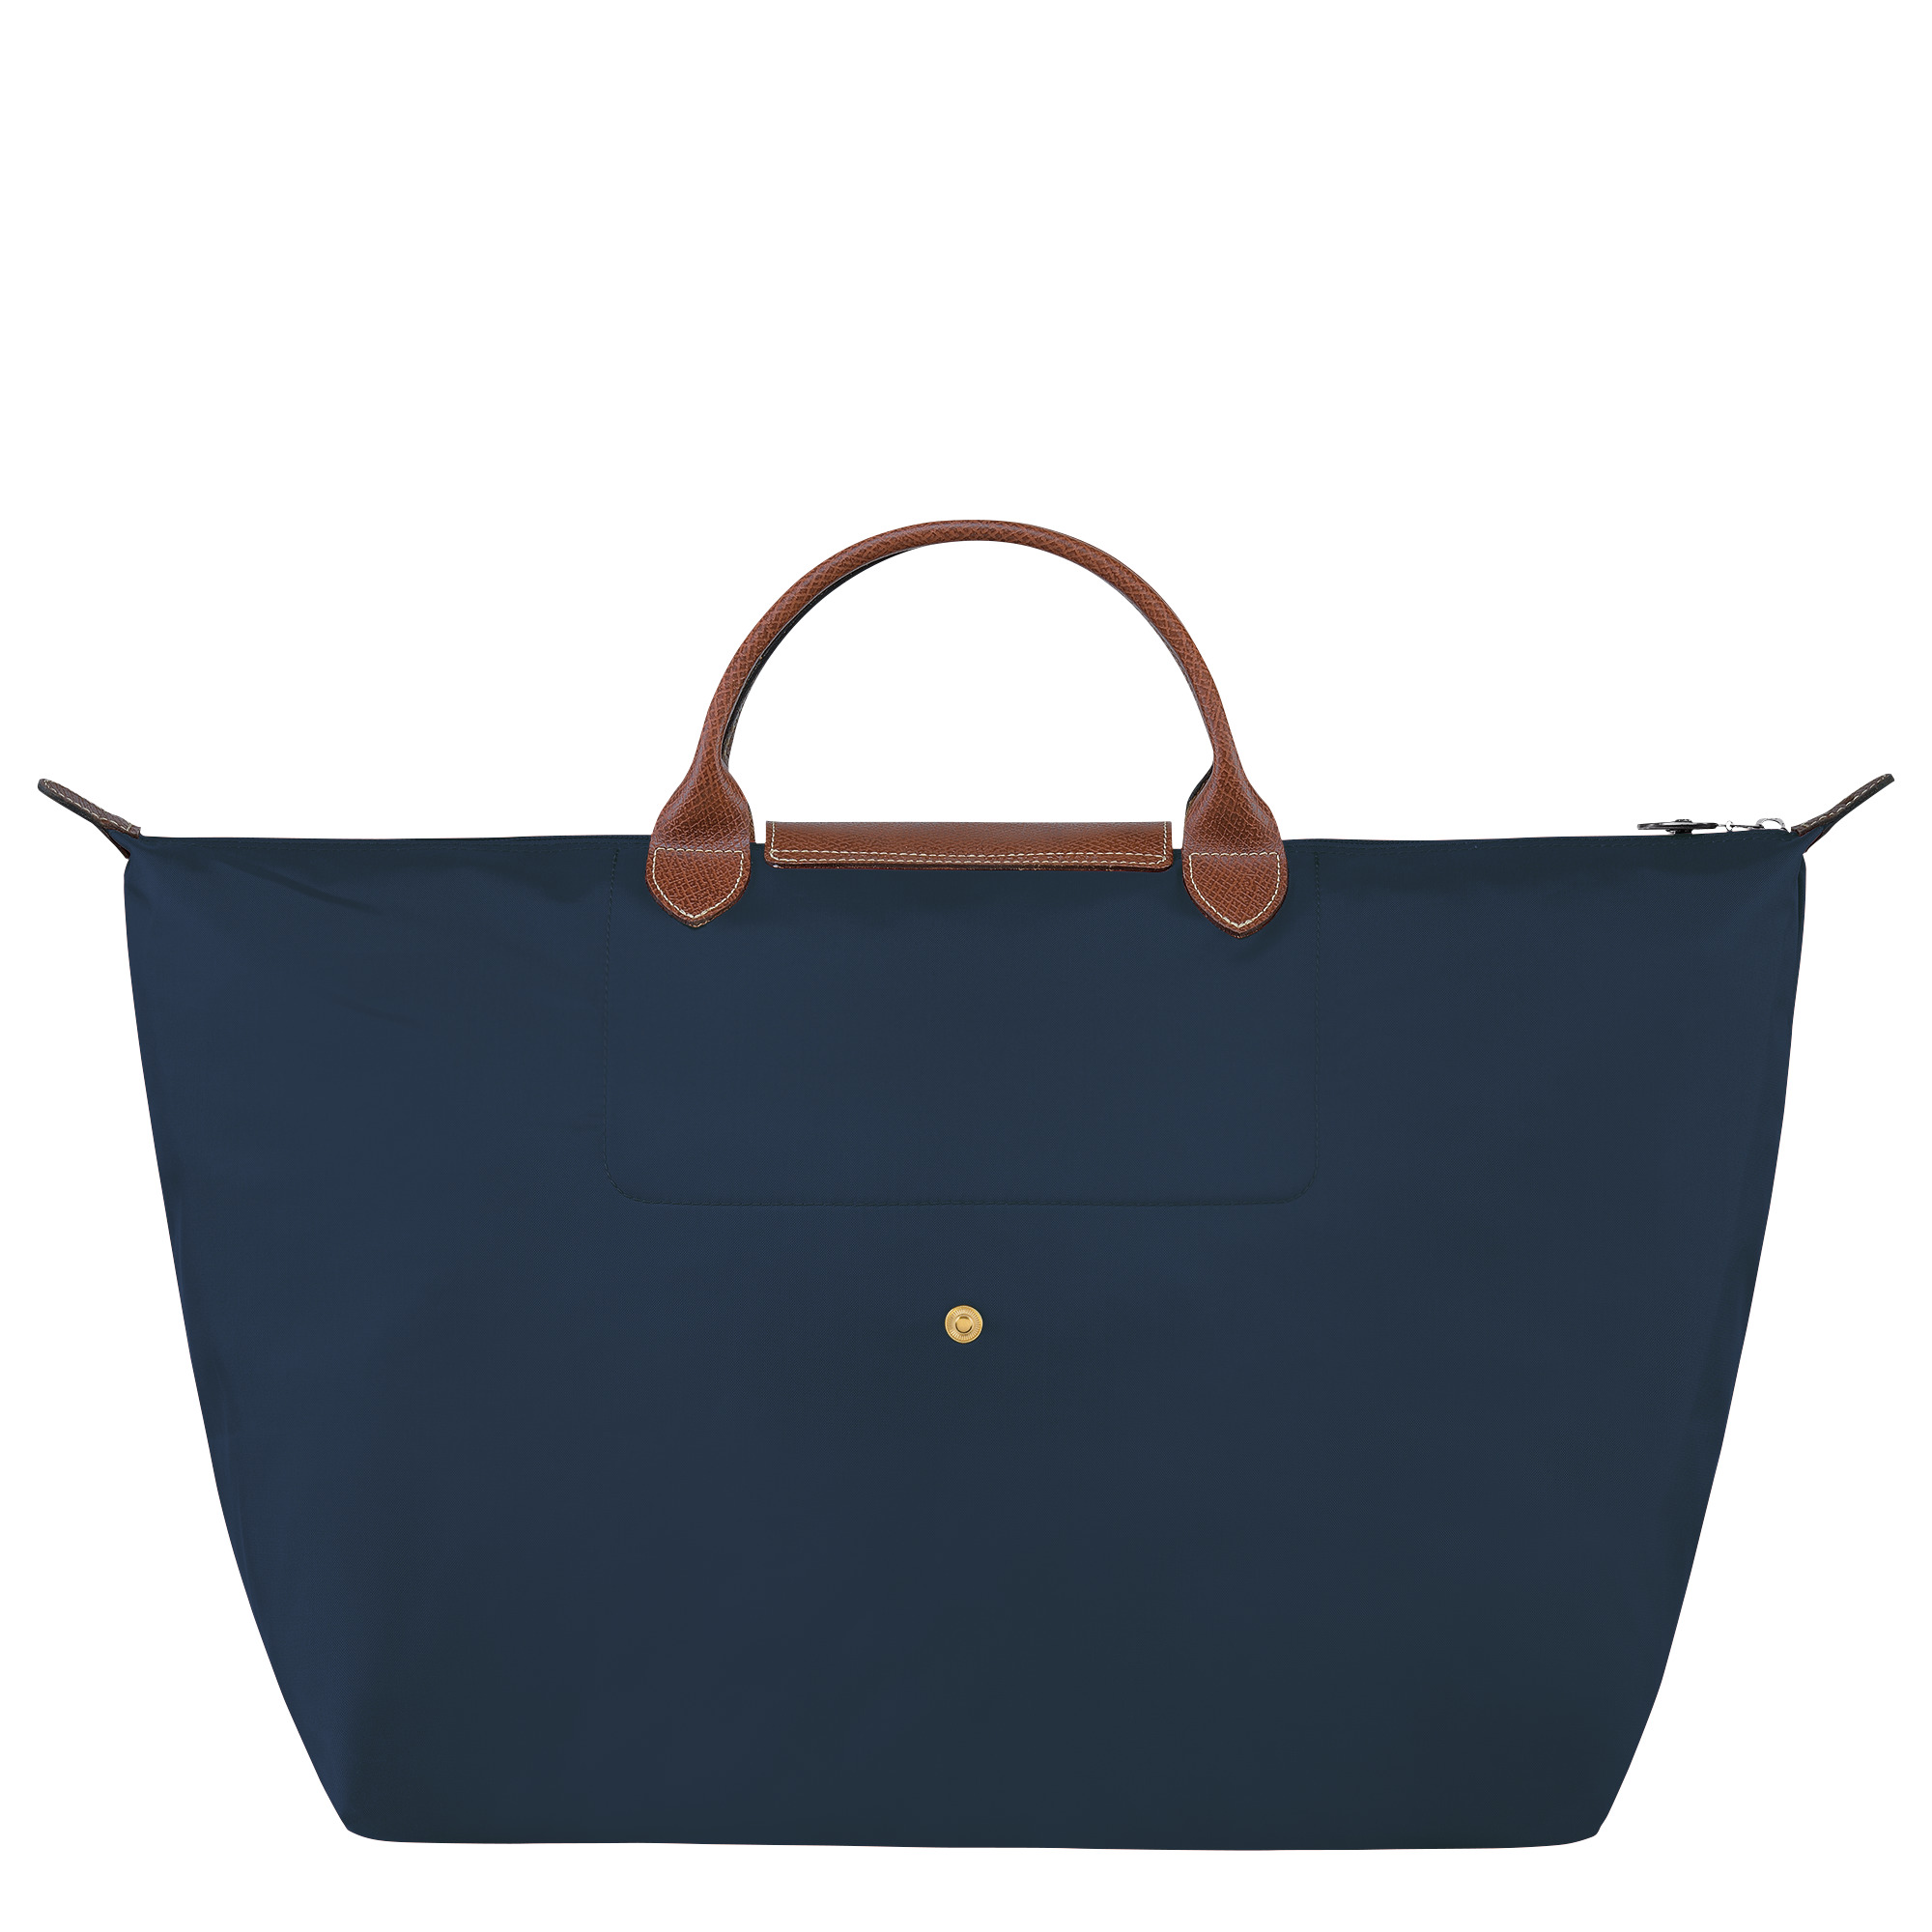 Le Pliage Original S Travel bag Navy - Recycled canvas - 4